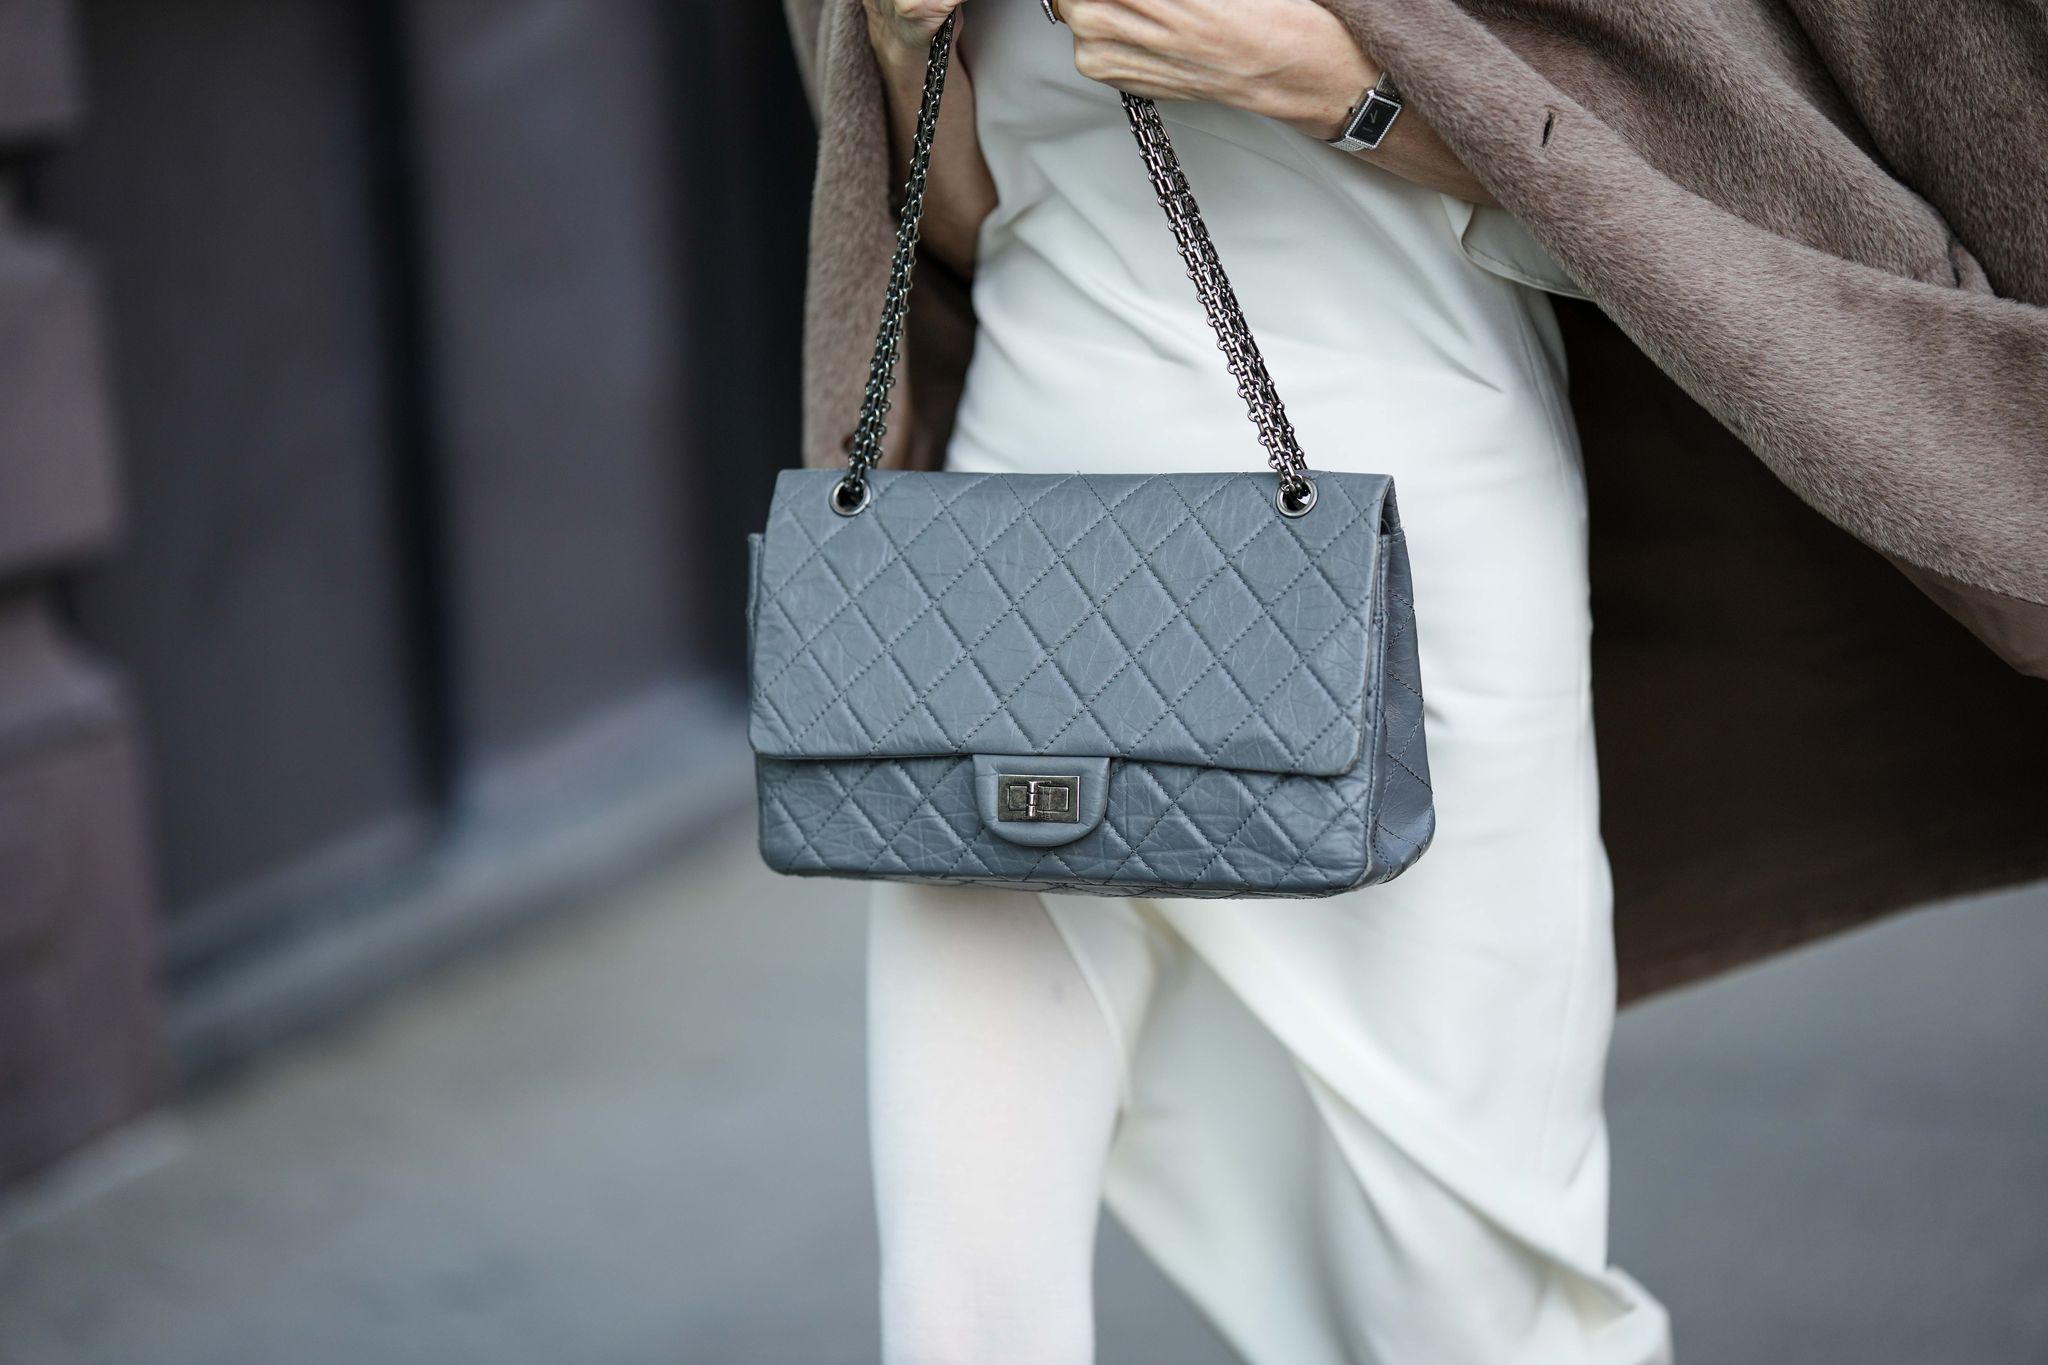 HOW TO BUY YOUR FIRST CHANEL BAG IN 2023 FOR EVERY BUDGET? 